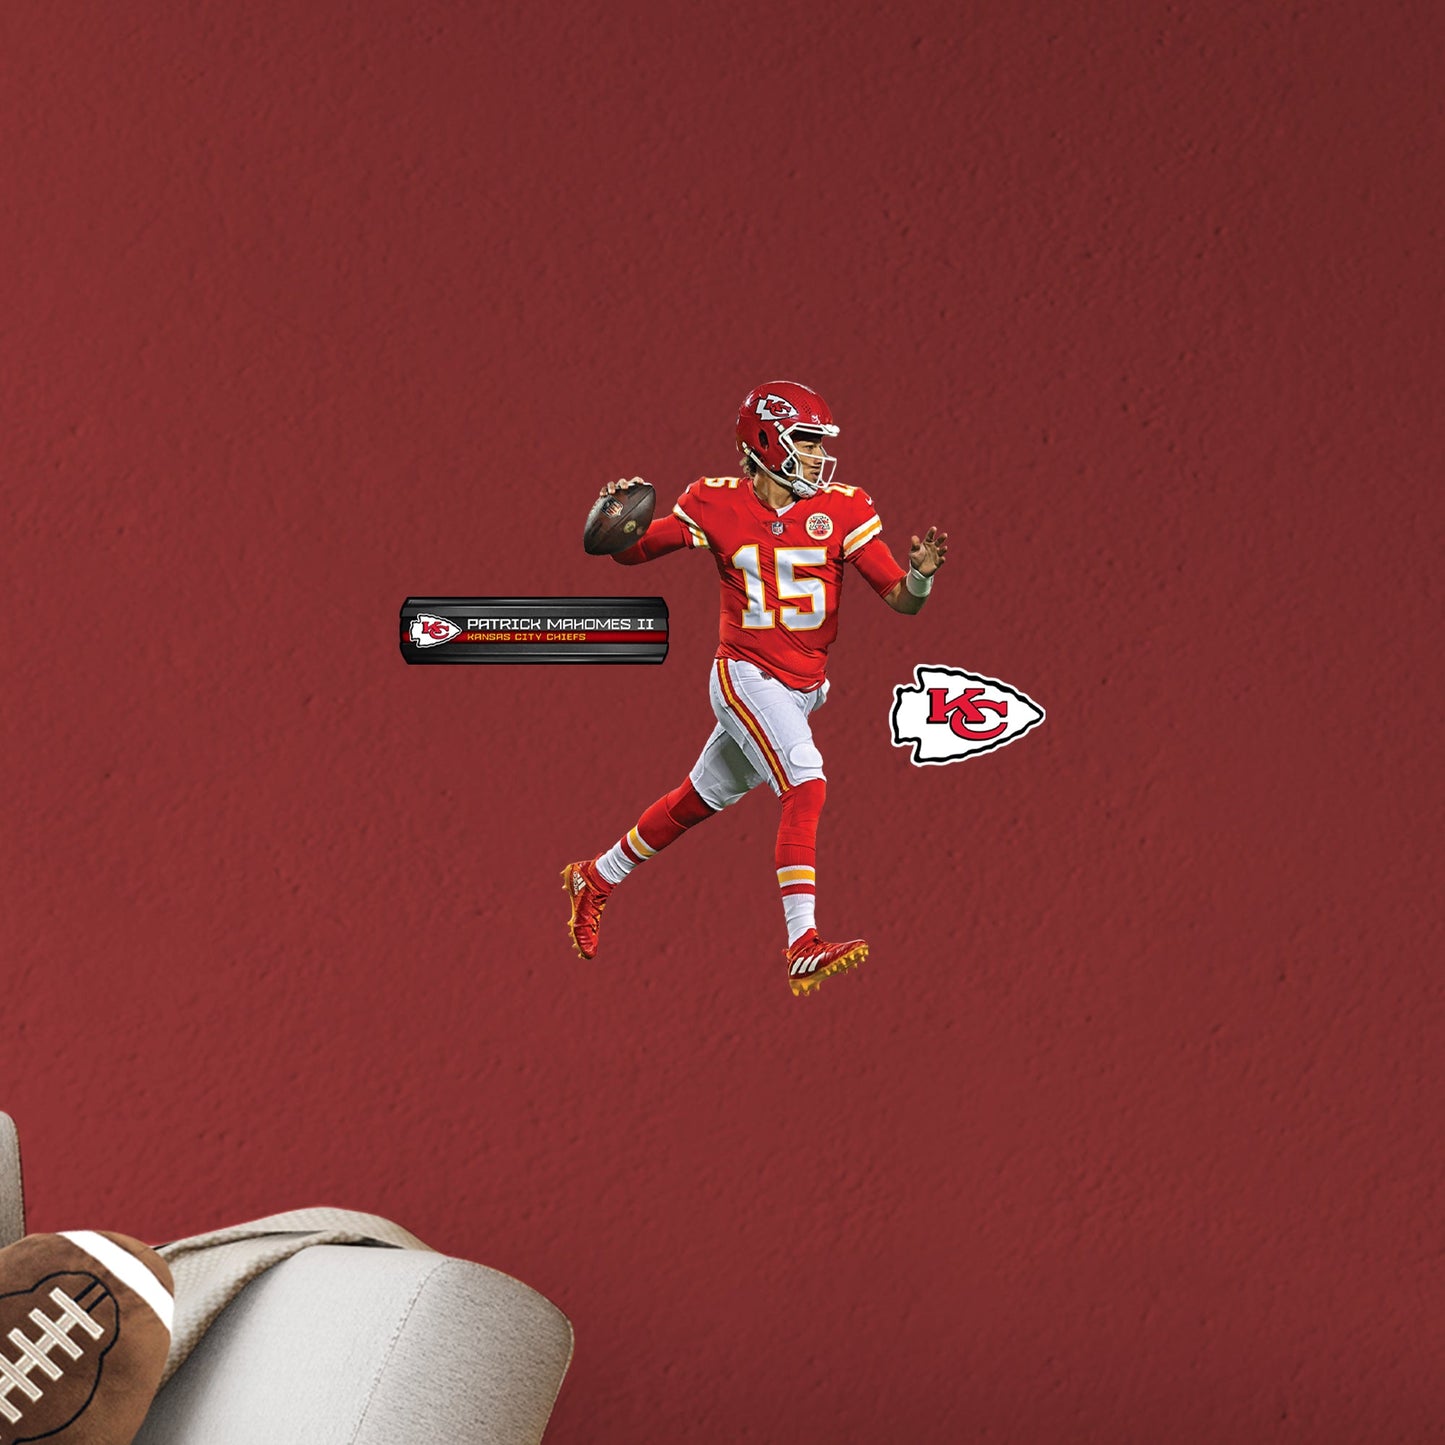 Kansas City Chiefs: Patrick Mahomes II - Officially Licensed NFL Removable Adhesive Decal